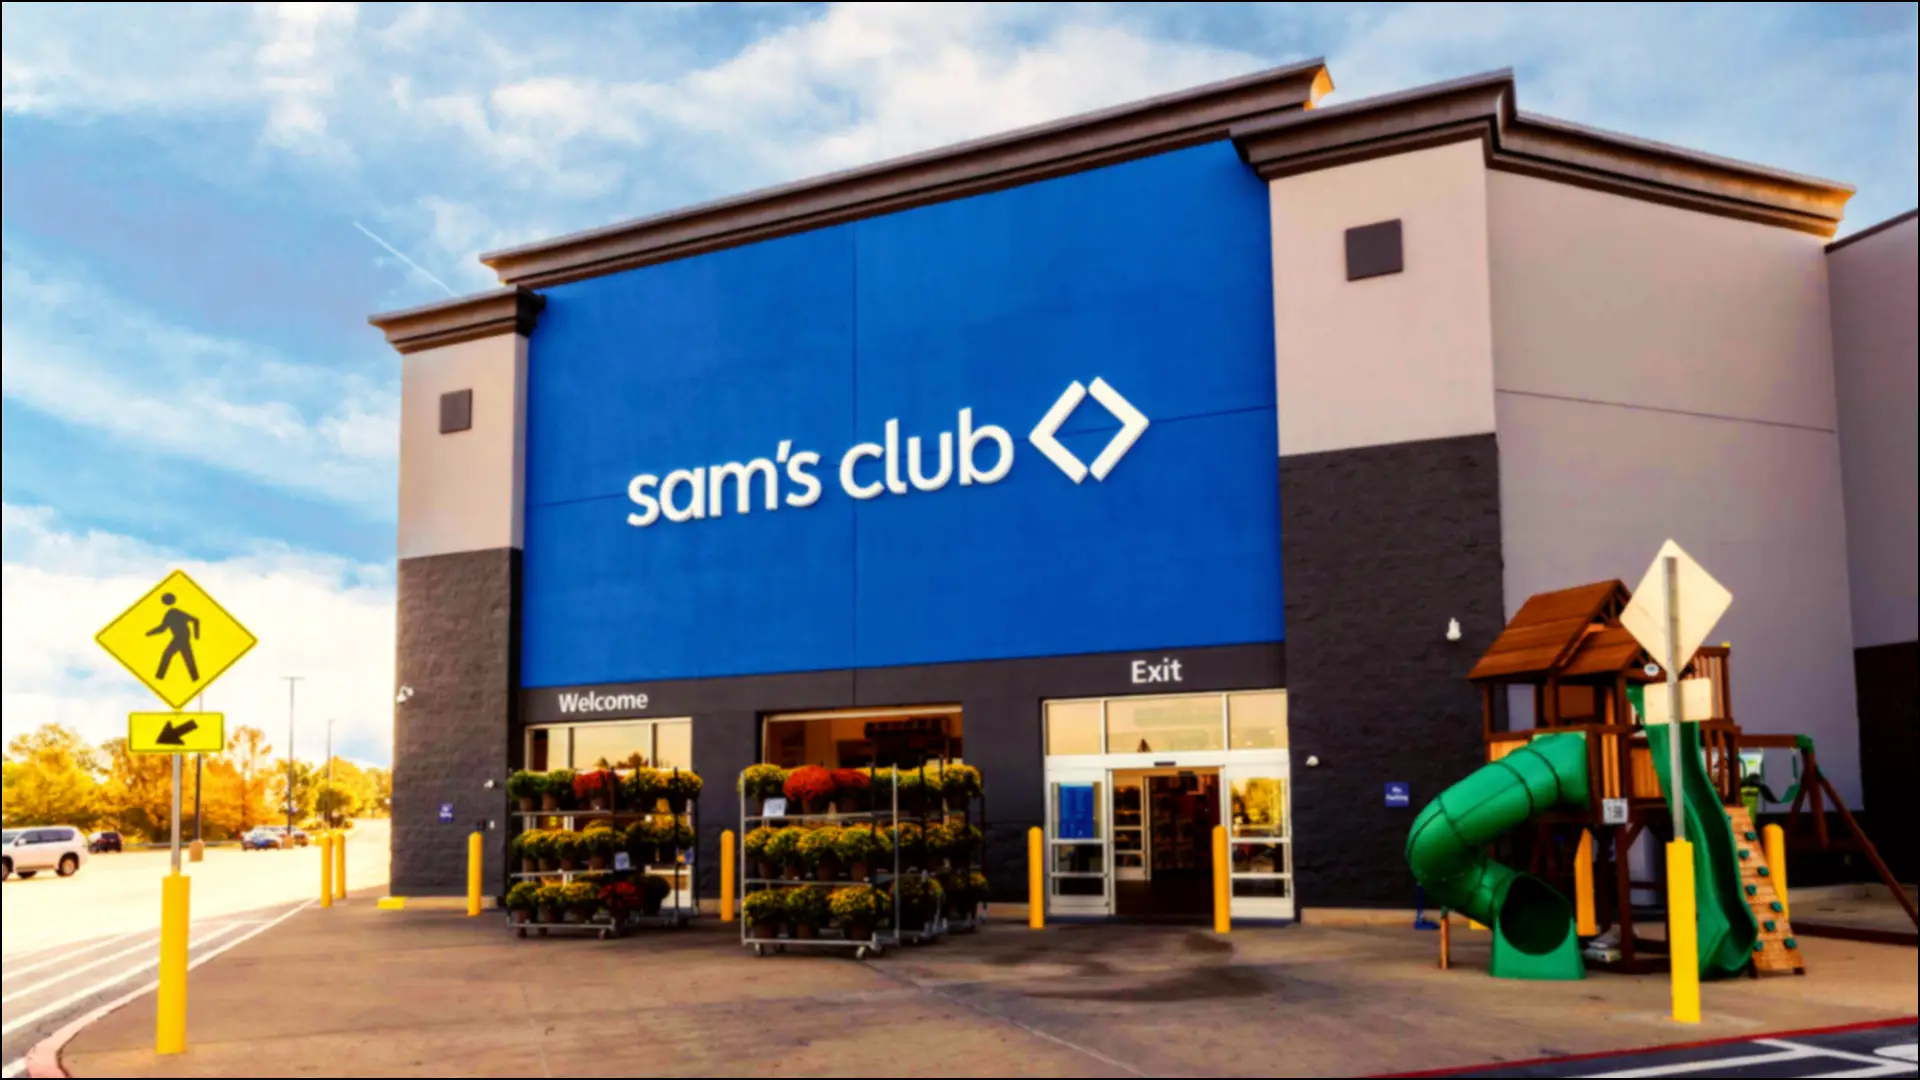 Sam's Club is testing out AI, computer vision tech